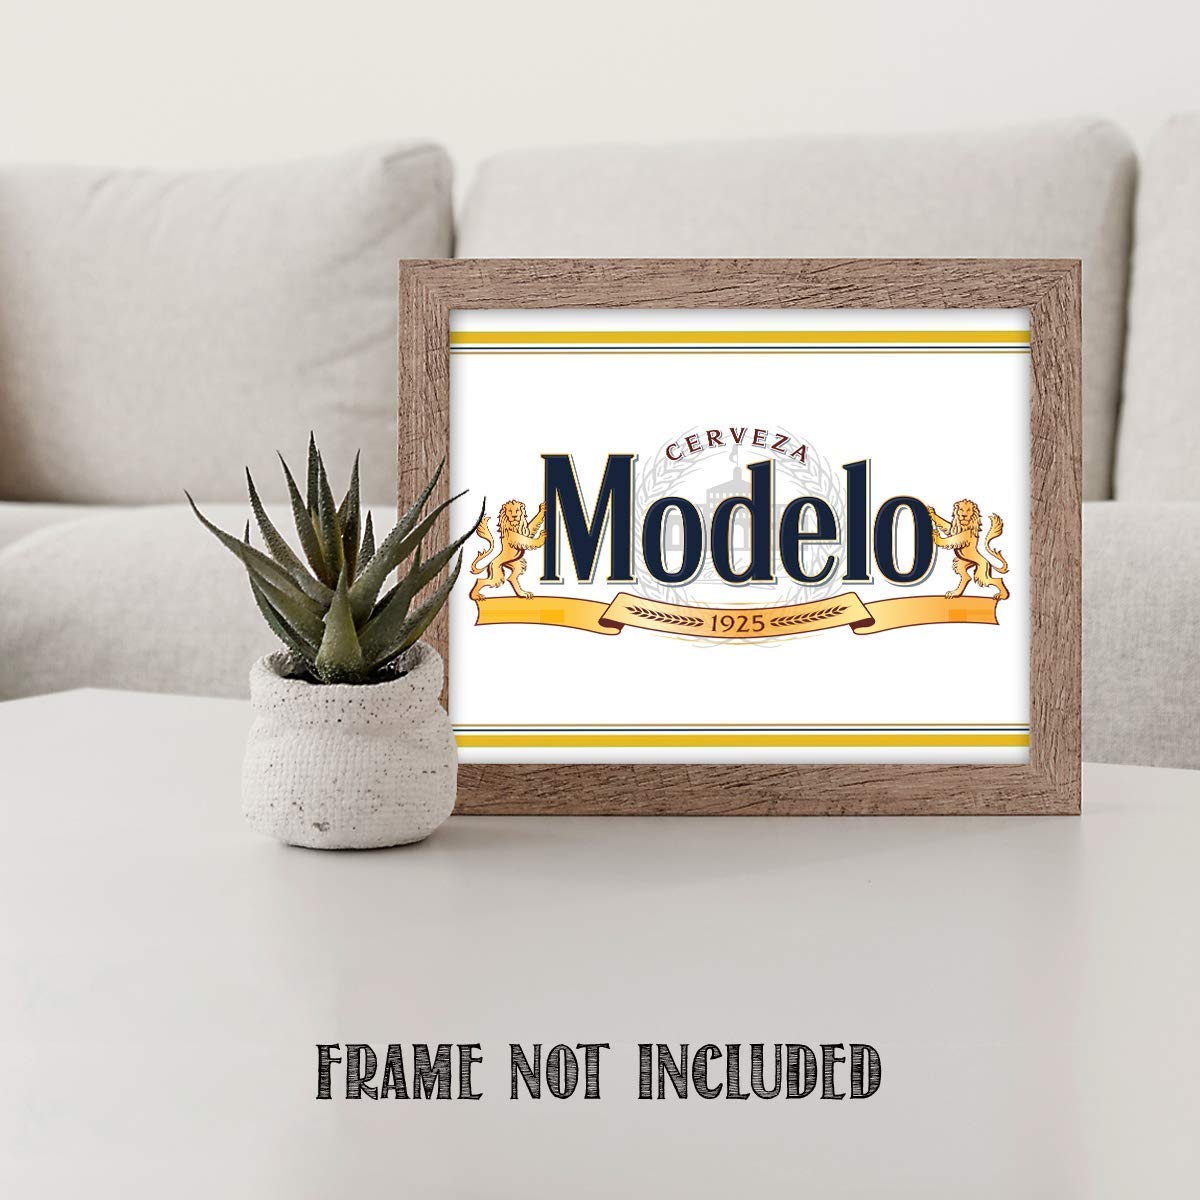 Modelo Beer- Logo Poster Print- 10 x 8" Wall Decor Print-Ready To Frame."Cerveza-1925"-Beer Sign Replica Print. Perfect Decor for Man Cave-Bar-Game Room-Garage-Dorm. Great Gift!